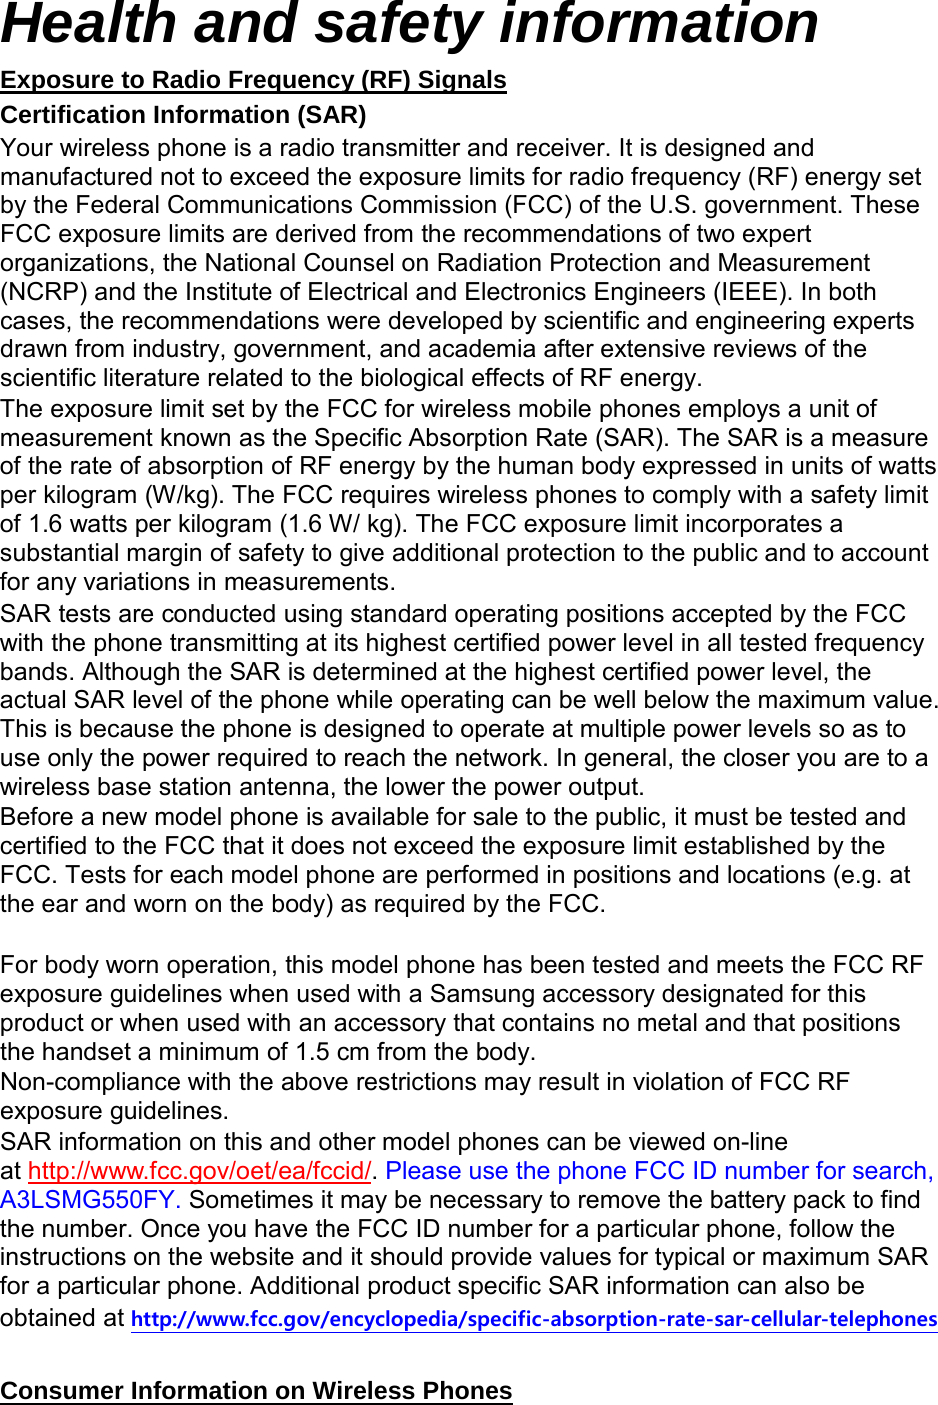 Health and safety information Certification Information (SAR) Exposure to Radio Frequency (RF) Signals Your wireless phone is a radio transmitter and receiver. It is designed and manufactured not to exceed the exposure limits for radio frequency (RF) energy set by the Federal Communications Commission (FCC) of the U.S. government. These FCC exposure limits are derived from the recommendations of two expert organizations, the National Counsel on Radiation Protection and Measurement (NCRP) and the Institute of Electrical and Electronics Engineers (IEEE). In both cases, the recommendations were developed by scientific and engineering experts drawn from industry, government, and academia after extensive reviews of the scientific literature related to the biological effects of RF energy. The exposure limit set by the FCC for wireless mobile phones employs a unit of measurement known as the Specific Absorption Rate (SAR). The SAR is a measure of the rate of absorption of RF energy by the human body expressed in units of watts per kilogram (W/kg). The FCC requires wireless phones to comply with a safety limit of 1.6 watts per kilogram (1.6 W/ kg). The FCC exposure limit incorporates a substantial margin of safety to give additional protection to the public and to account for any variations in measurements. SAR tests are conducted using standard operating positions accepted by the FCC with the phone transmitting at its highest certified power level in all tested frequency bands. Although the SAR is determined at the highest certified power level, the actual SAR level of the phone while operating can be well below the maximum value. This is because the phone is designed to operate at multiple power levels so as to use only the power required to reach the network. In general, the closer you are to a wireless base station antenna, the lower the power output. Before a new model phone is available for sale to the public, it must be tested and certified to the FCC that it does not exceed the exposure limit established by the FCC. Tests for each model phone are performed in positions and locations (e.g. at the ear and worn on the body) as required by the FCC.      For body worn operation, this model phone has been tested and meets the FCC RF exposure guidelines when used with a Samsung accessory designated for this product or when used with an accessory that contains no metal and that positions the handset a minimum of 1.5 cm from the body.   Non-compliance with the above restrictions may result in violation of FCC RF exposure guidelines. SAR information on this and other model phones can be viewed on-line at http://www.fcc.gov/oet/ea/fccid/. Please use the phone FCC ID number for search, A3LSMG550FY. Sometimes it may be necessary to remove the battery pack to find the number. Once you have the FCC ID number for a particular phone, follow the instructions on the website and it should provide values for typical or maximum SAR for a particular phone. Additional product specific SAR information can also be obtained at http://www.fcc.gov/encyclopedia/specific-absorption-rate-sar-cellular-telephones  Consumer Information on Wireless Phones 